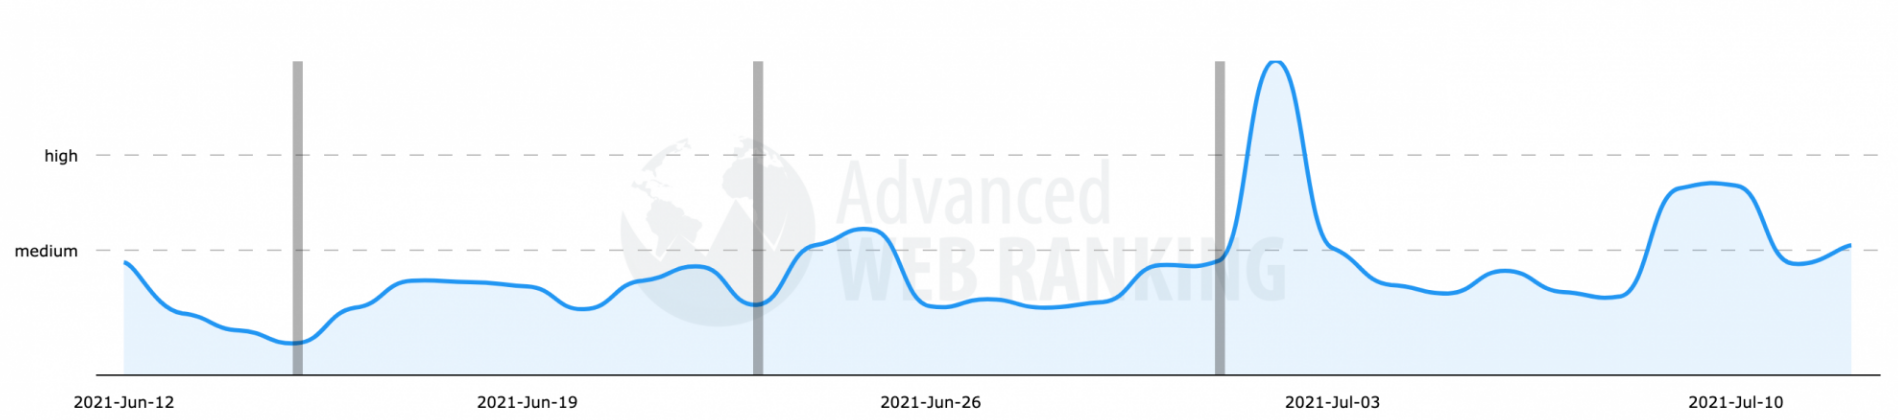 Advanced Web Ranking July Core Update SERP fluctuations